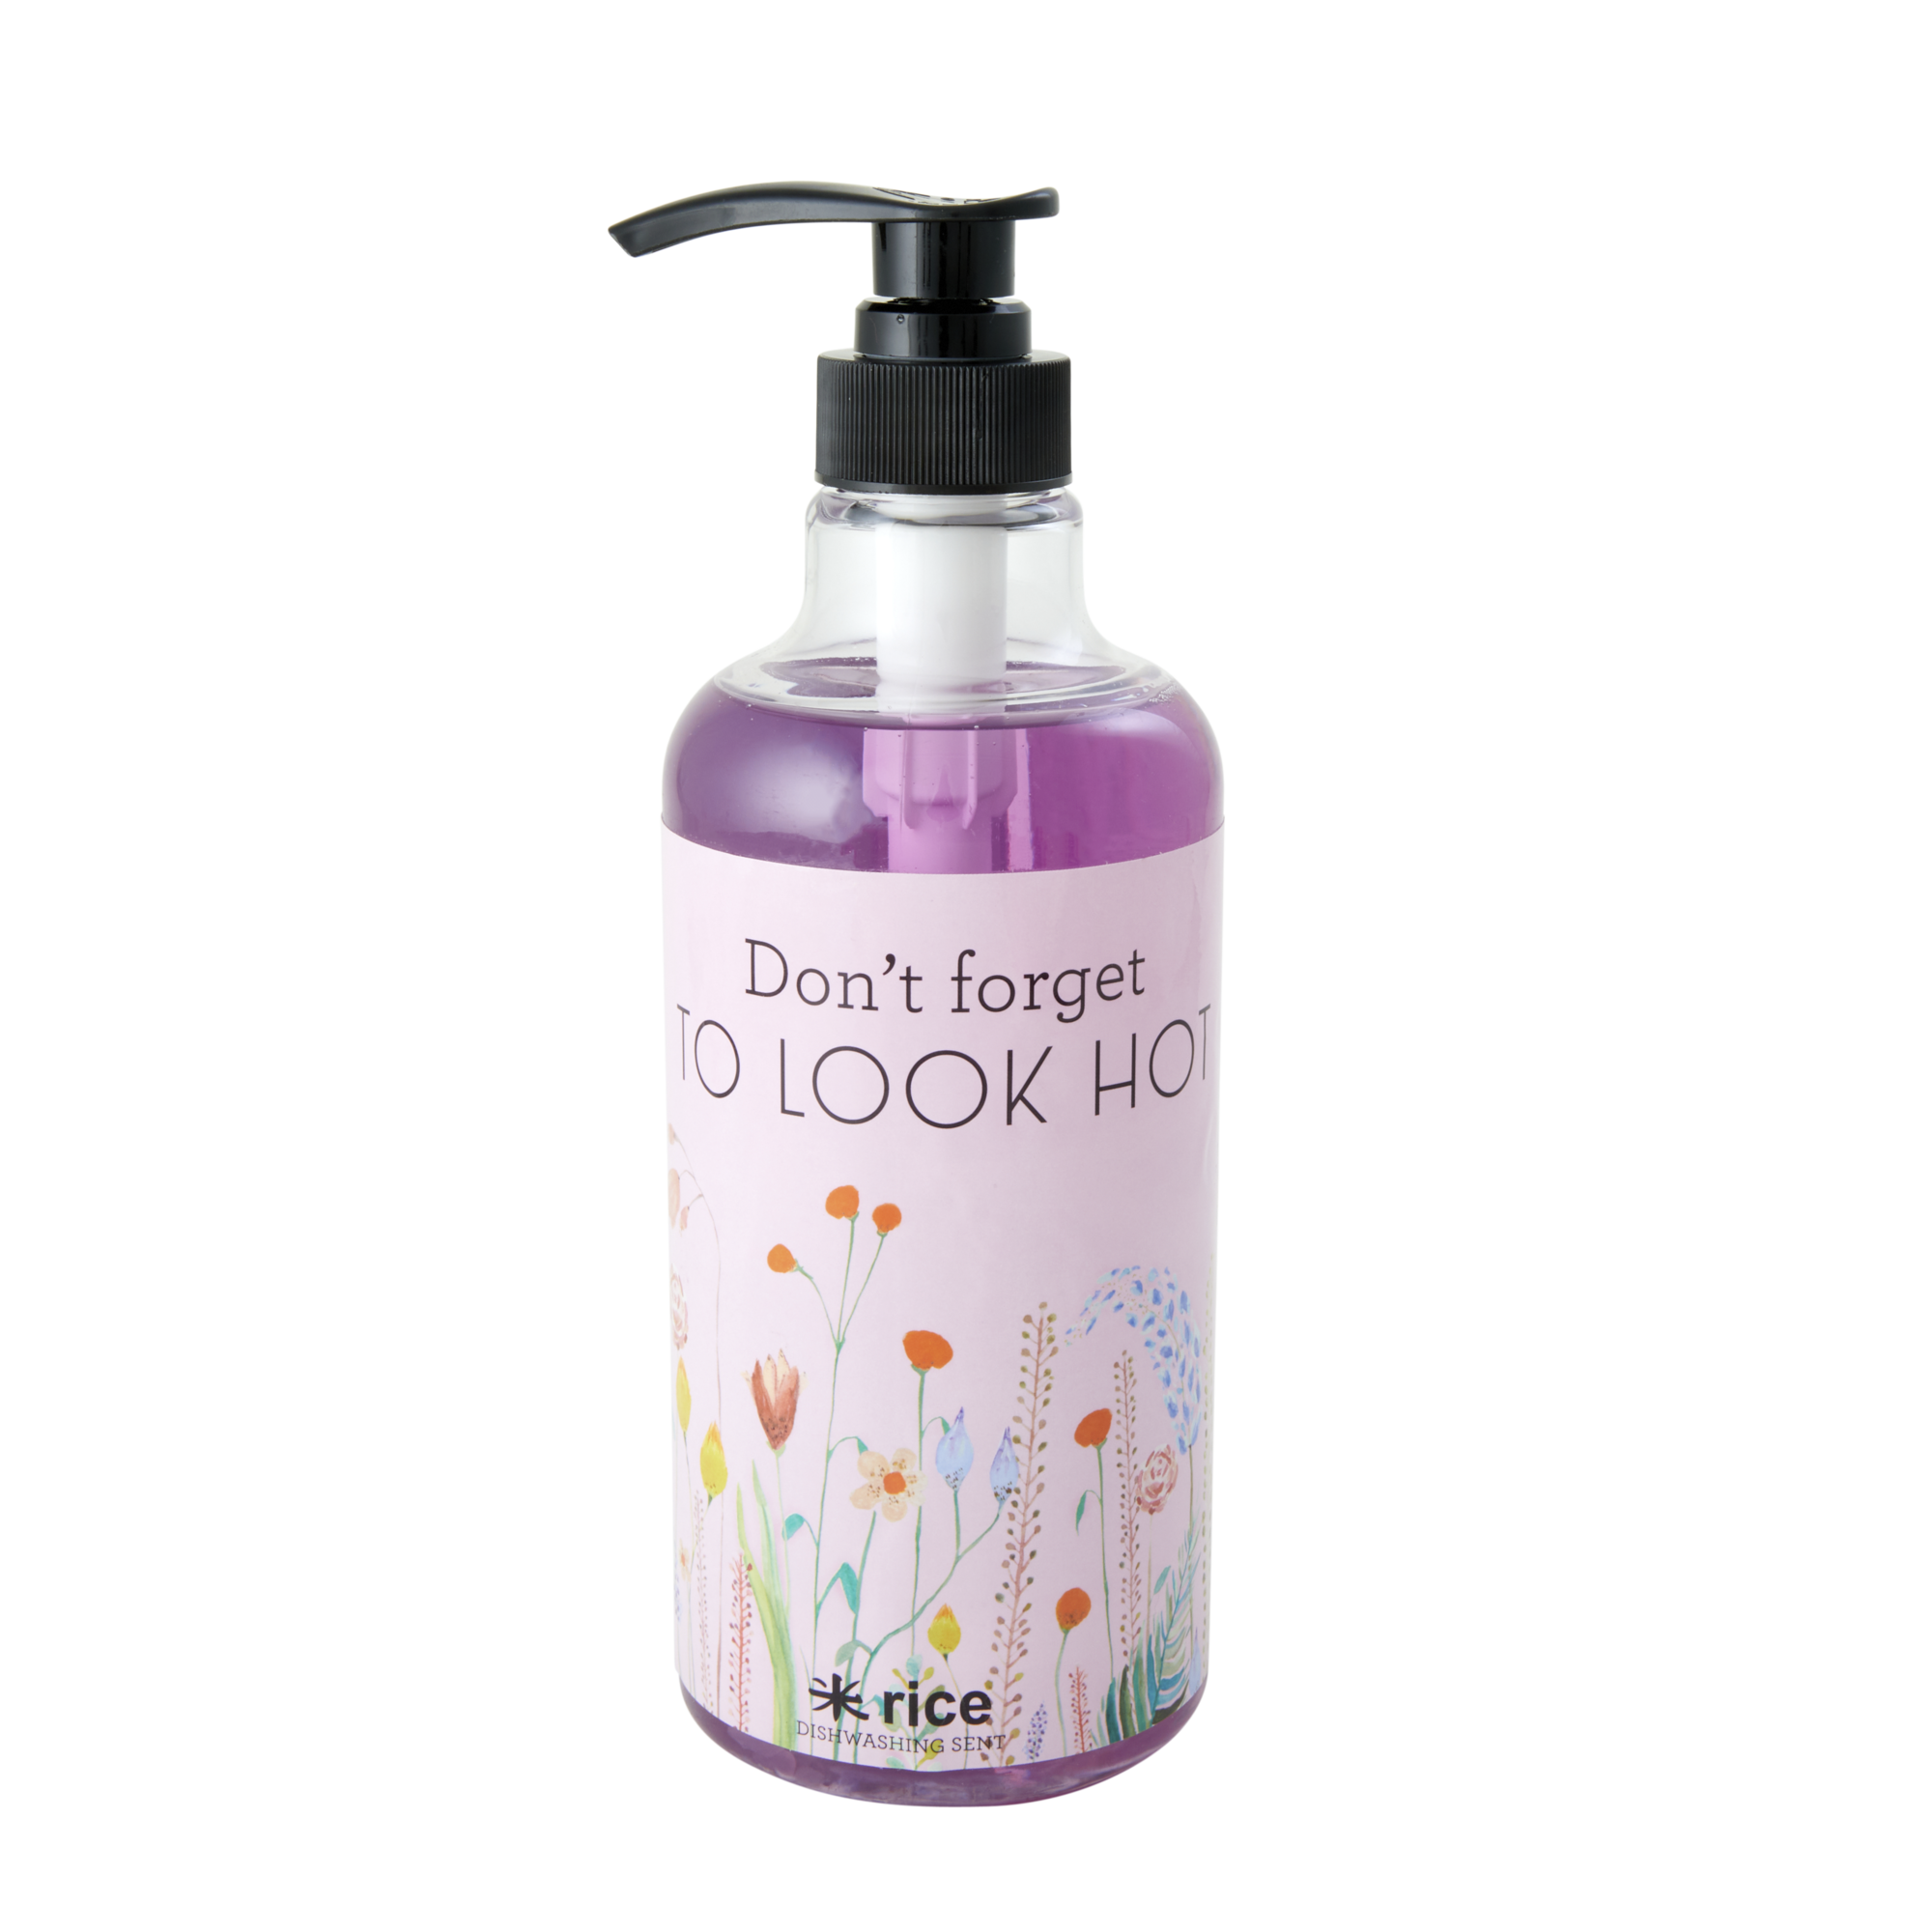 Rice - Dishwashing Liquid w. Lavender Scent - Don't Forget To Look Hot